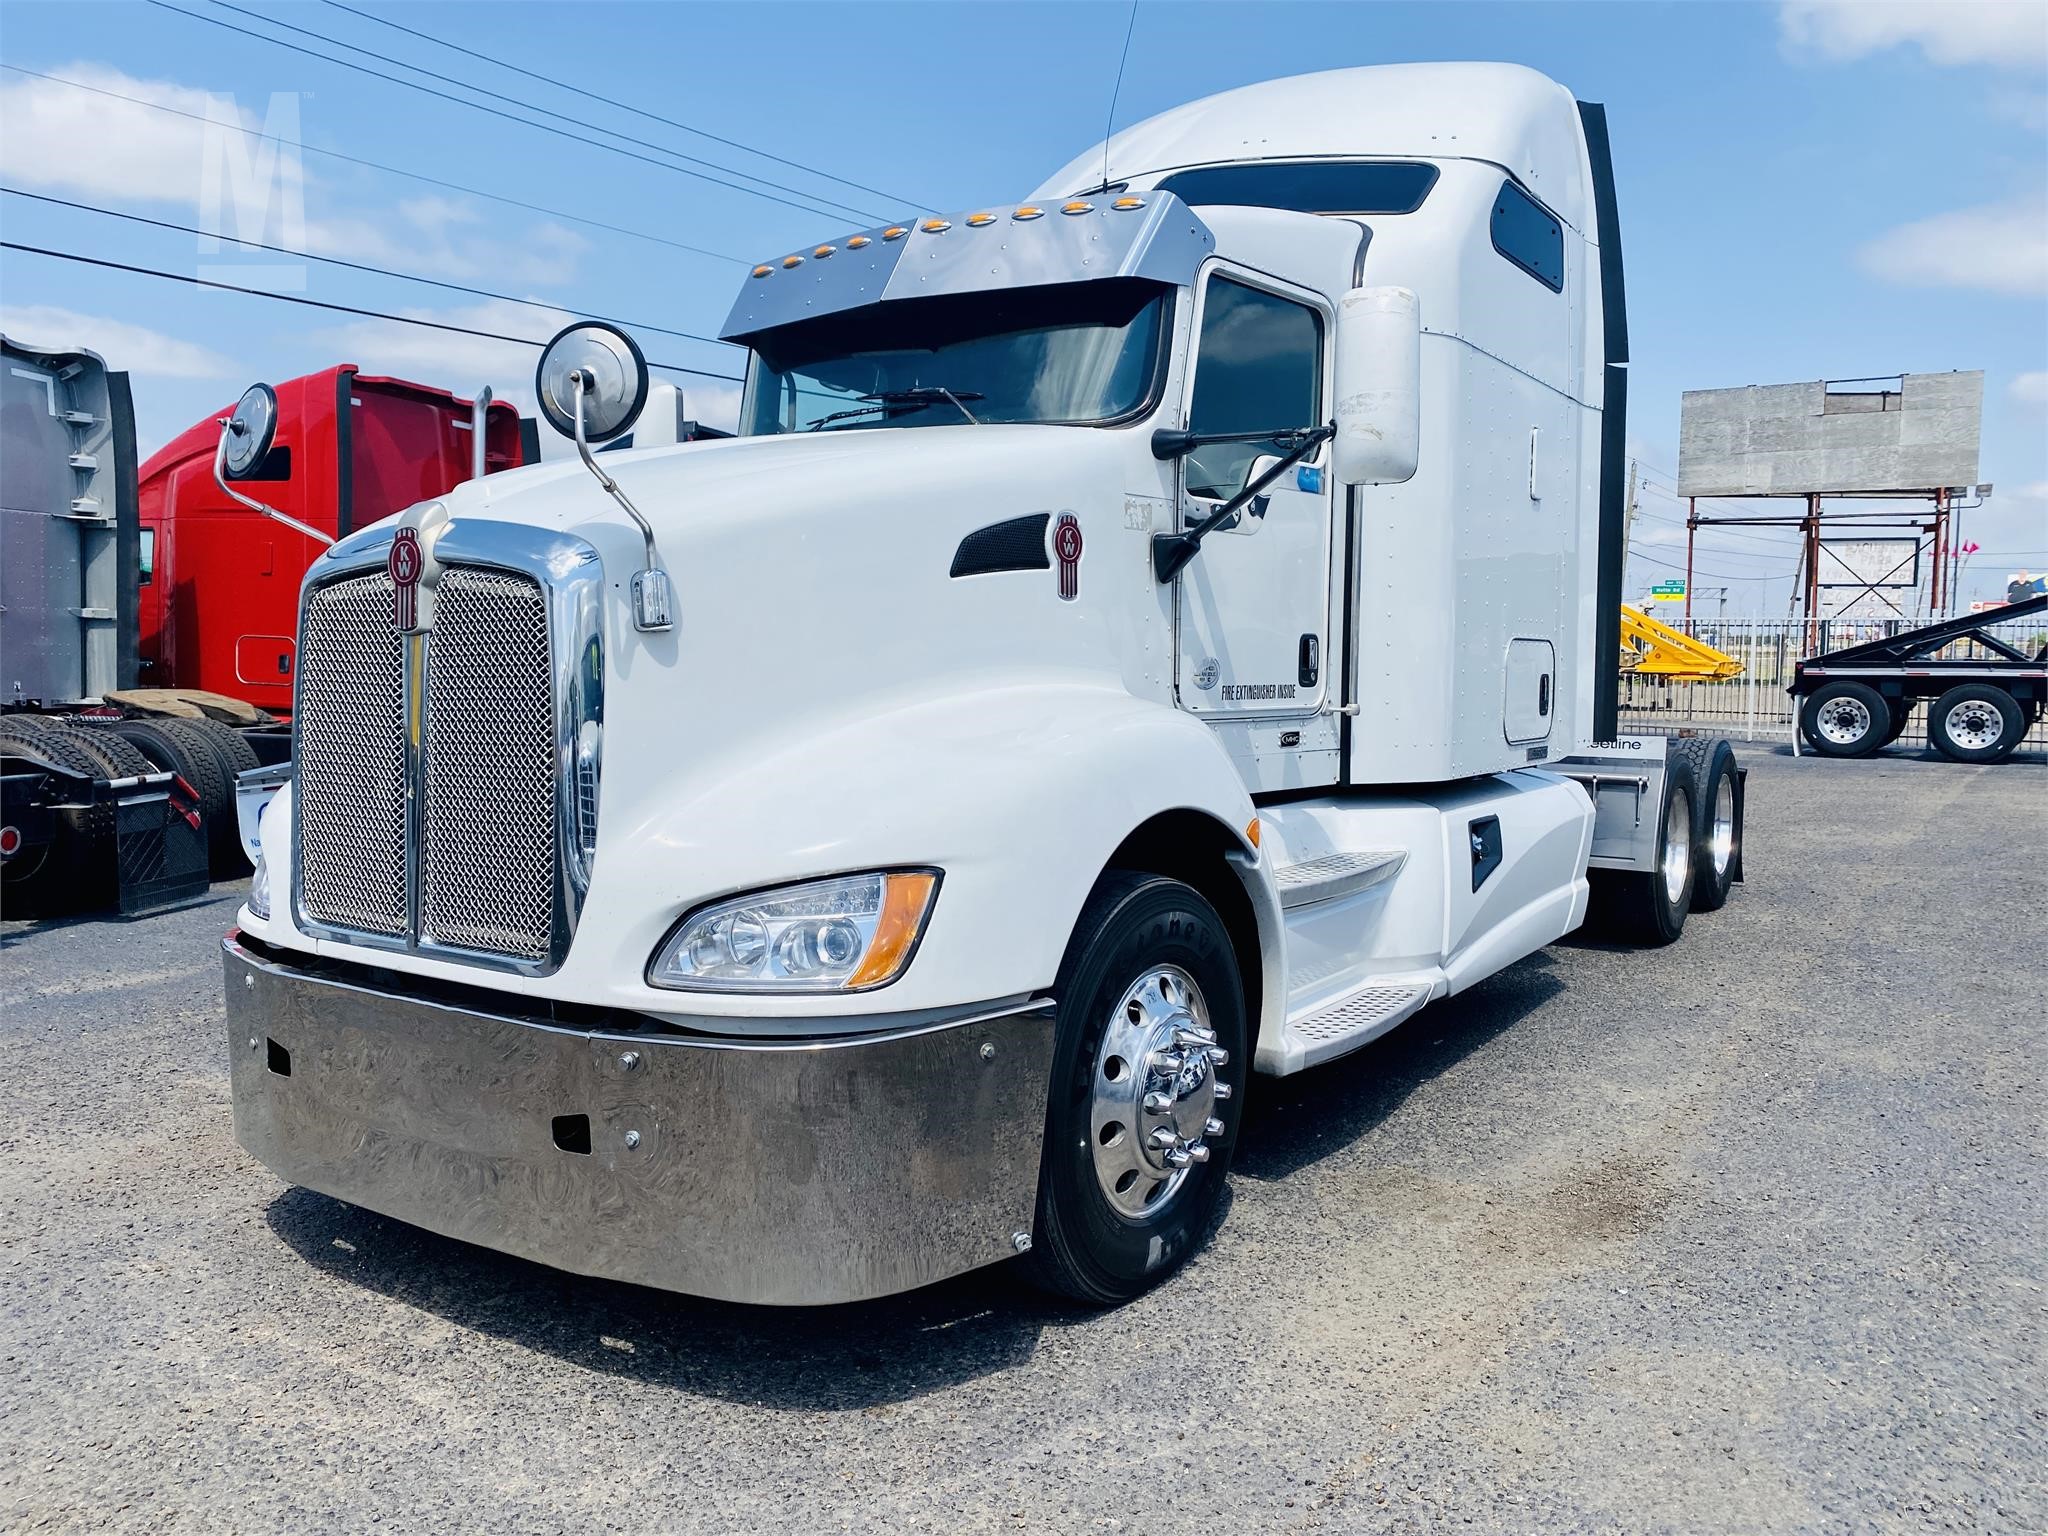 2013 KENWORTH T660 For Sale In Donna, Texas MarketBook.ca